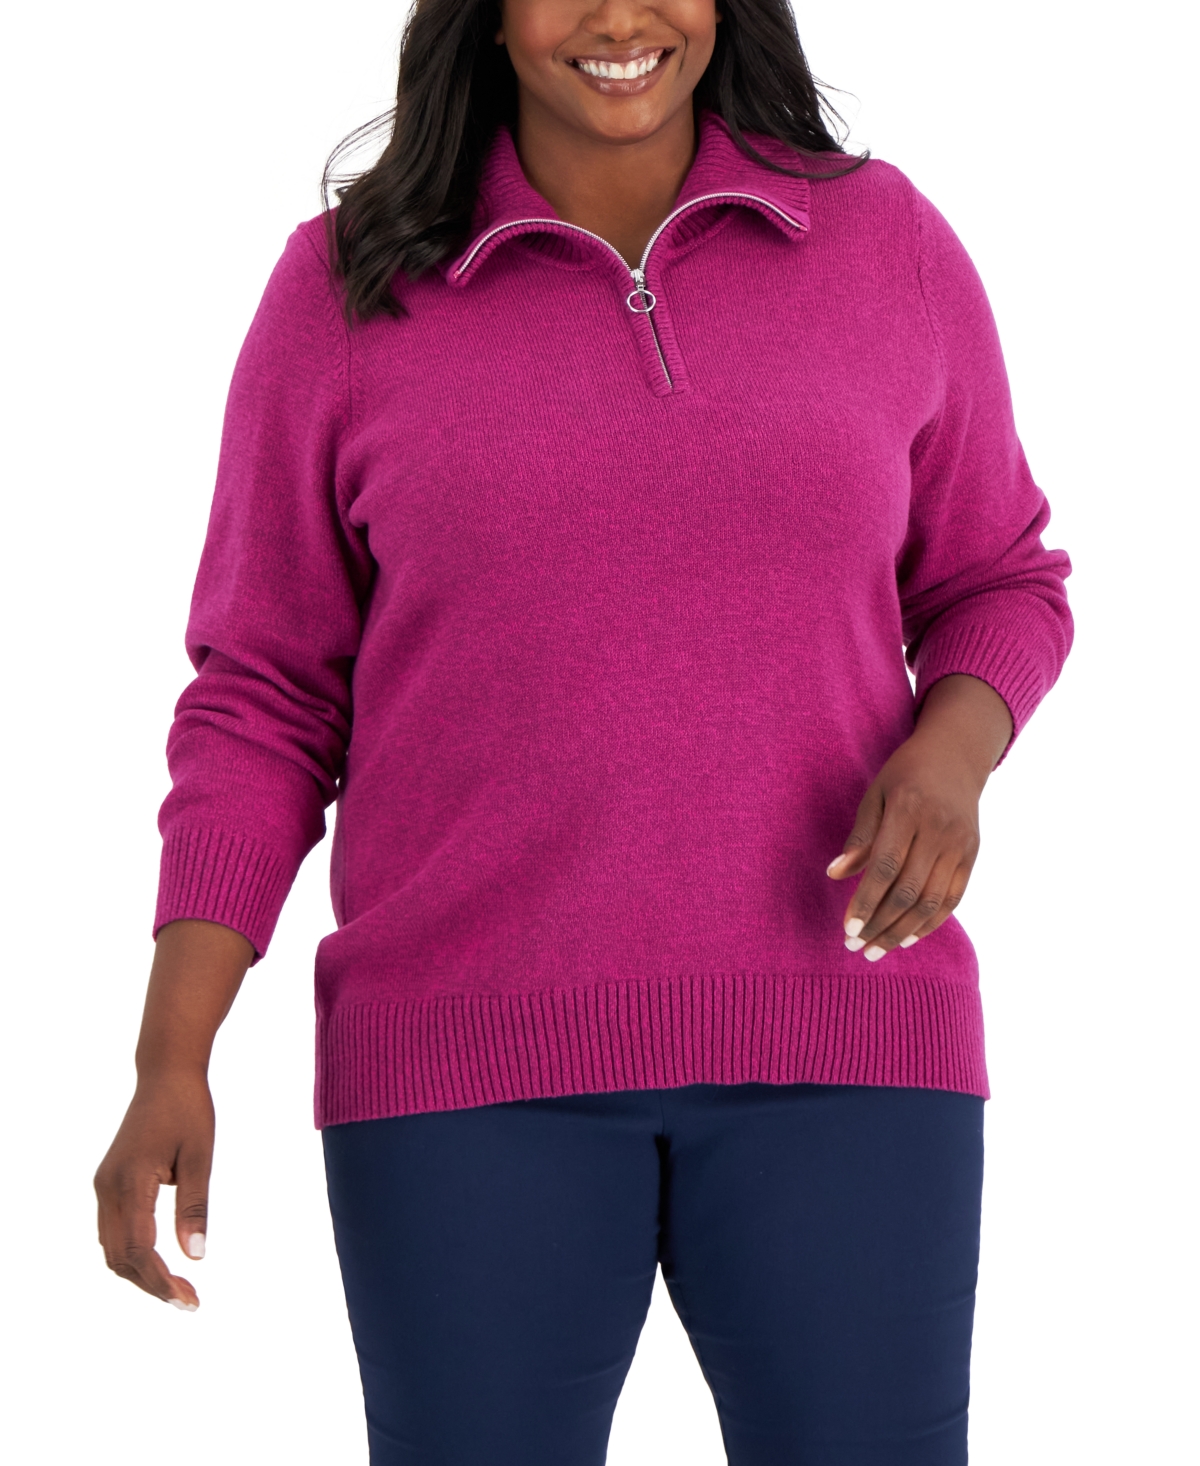 Karen Scott Plus Size Cotton Marled Sweater, Created for Macy's